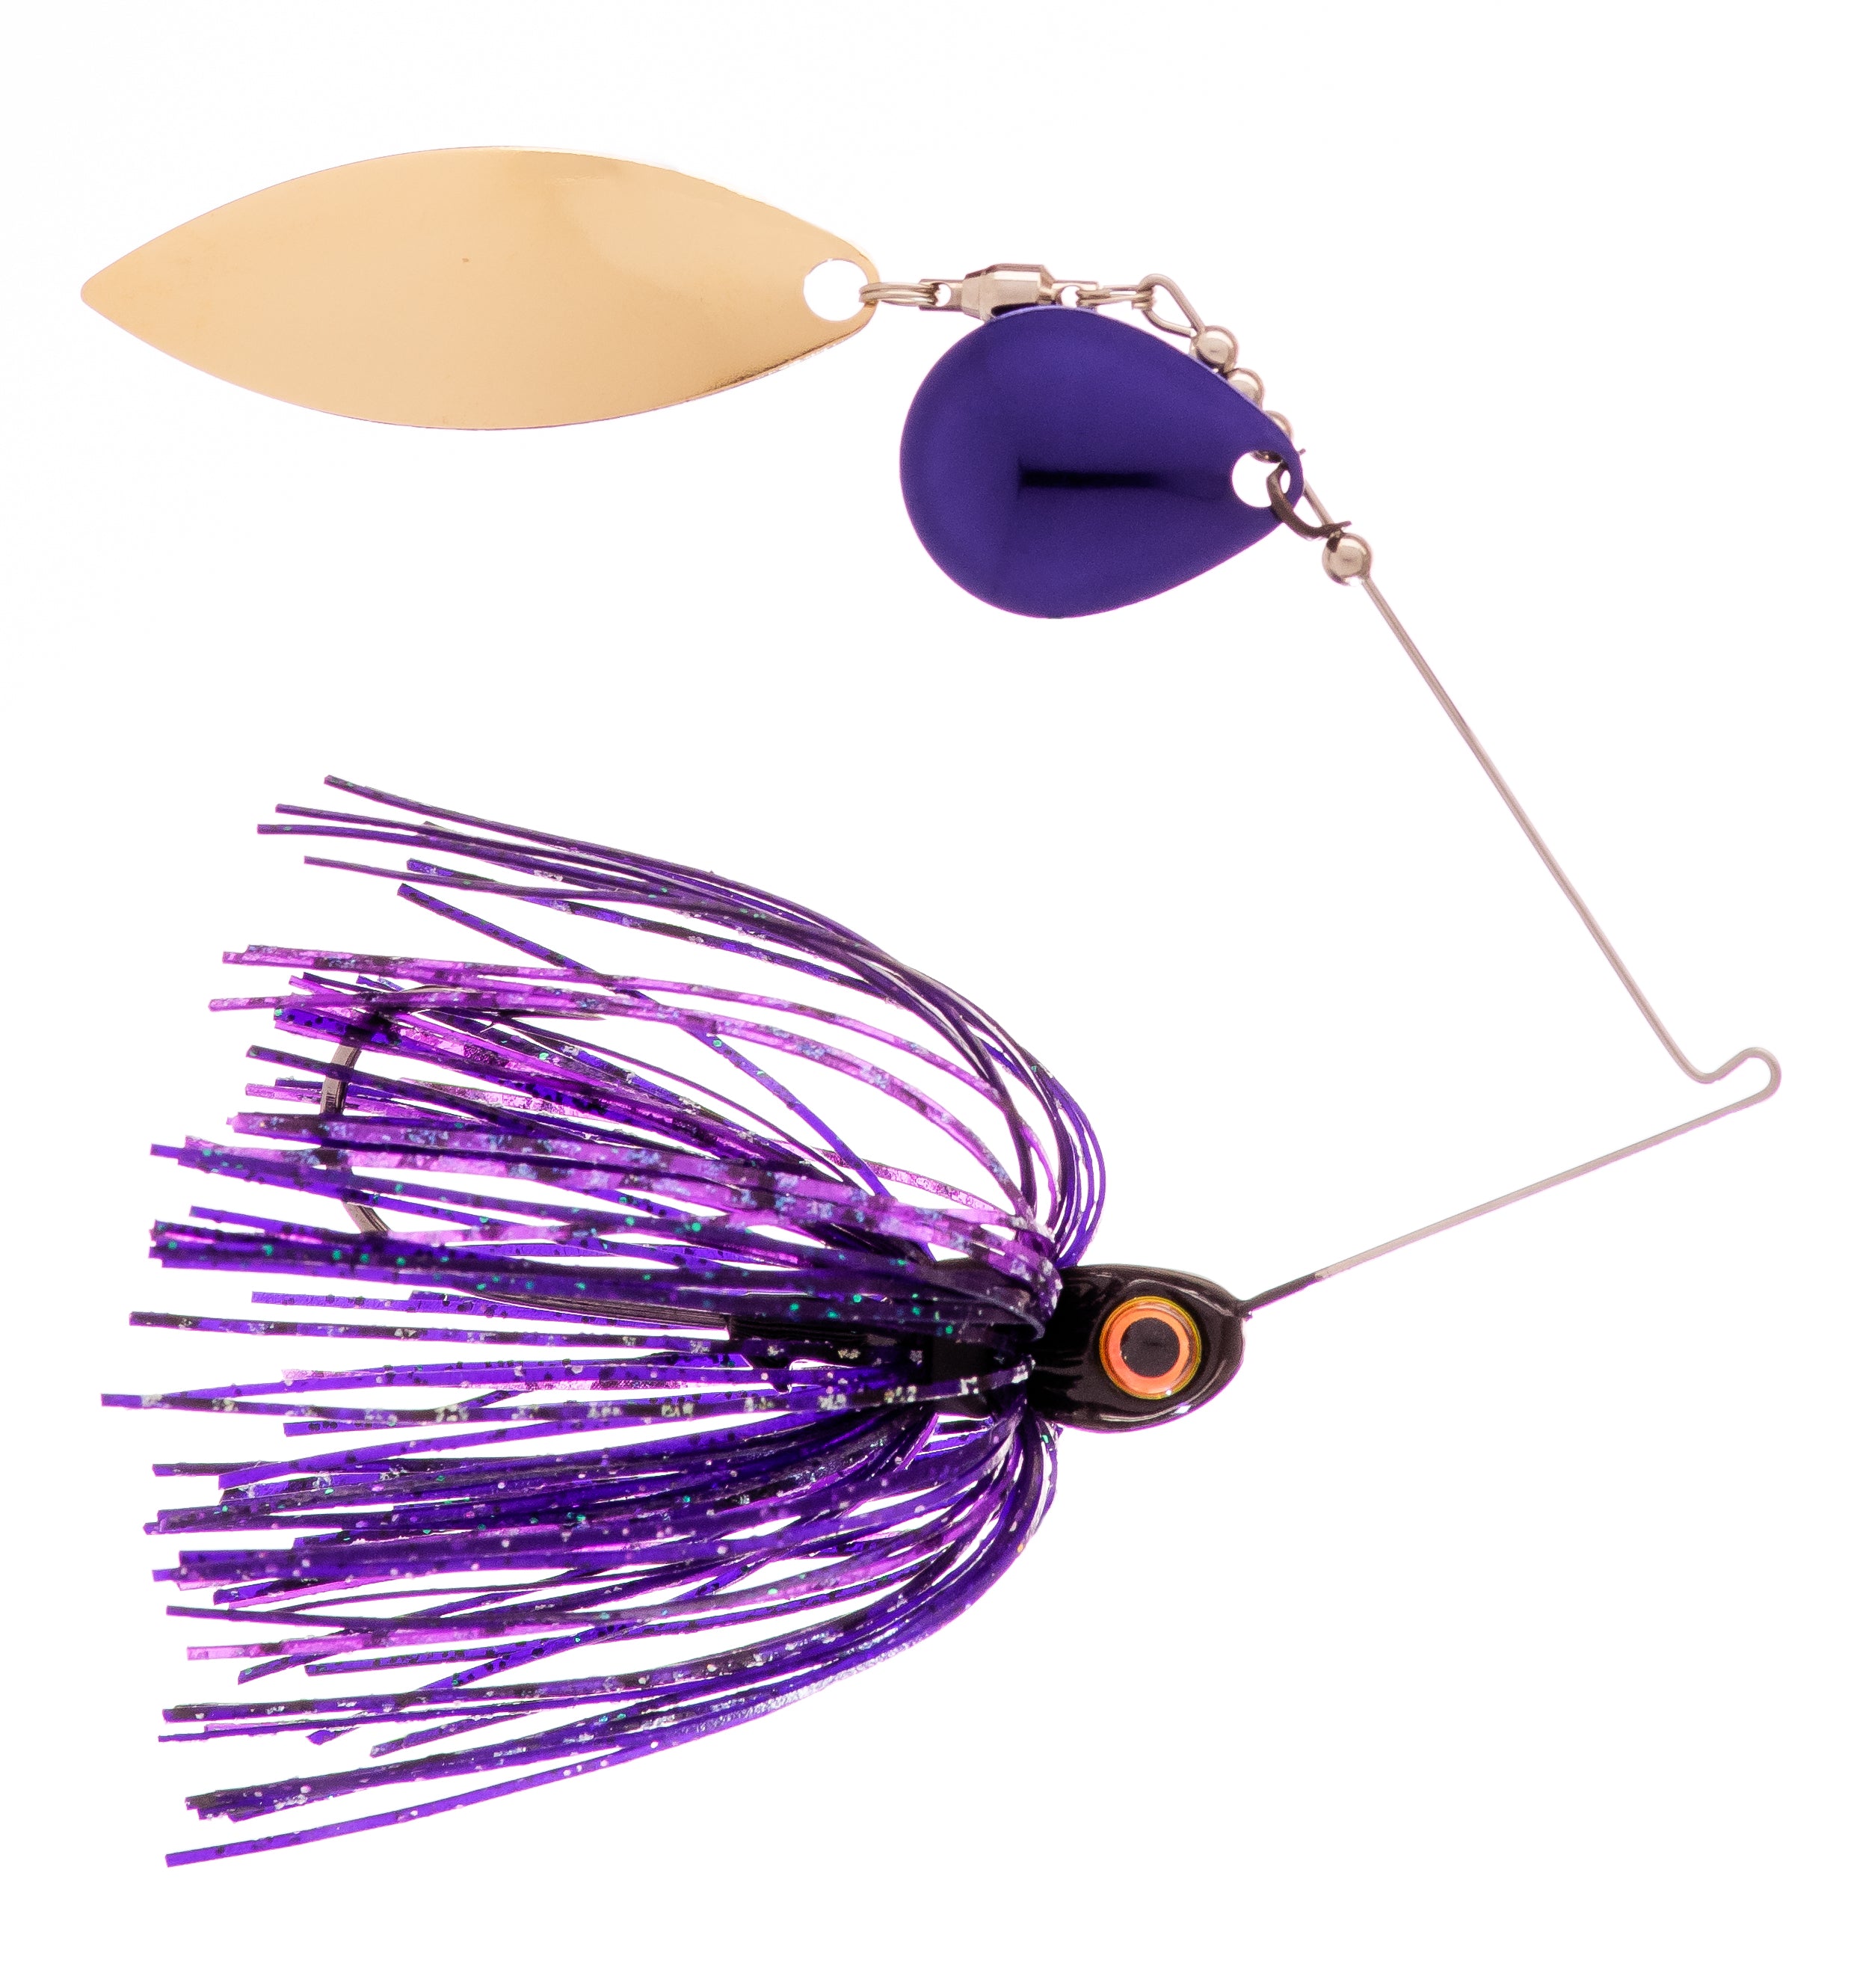 Ready2Fish Inline Spinner Lure - Firetiger, Spinnerbaits 